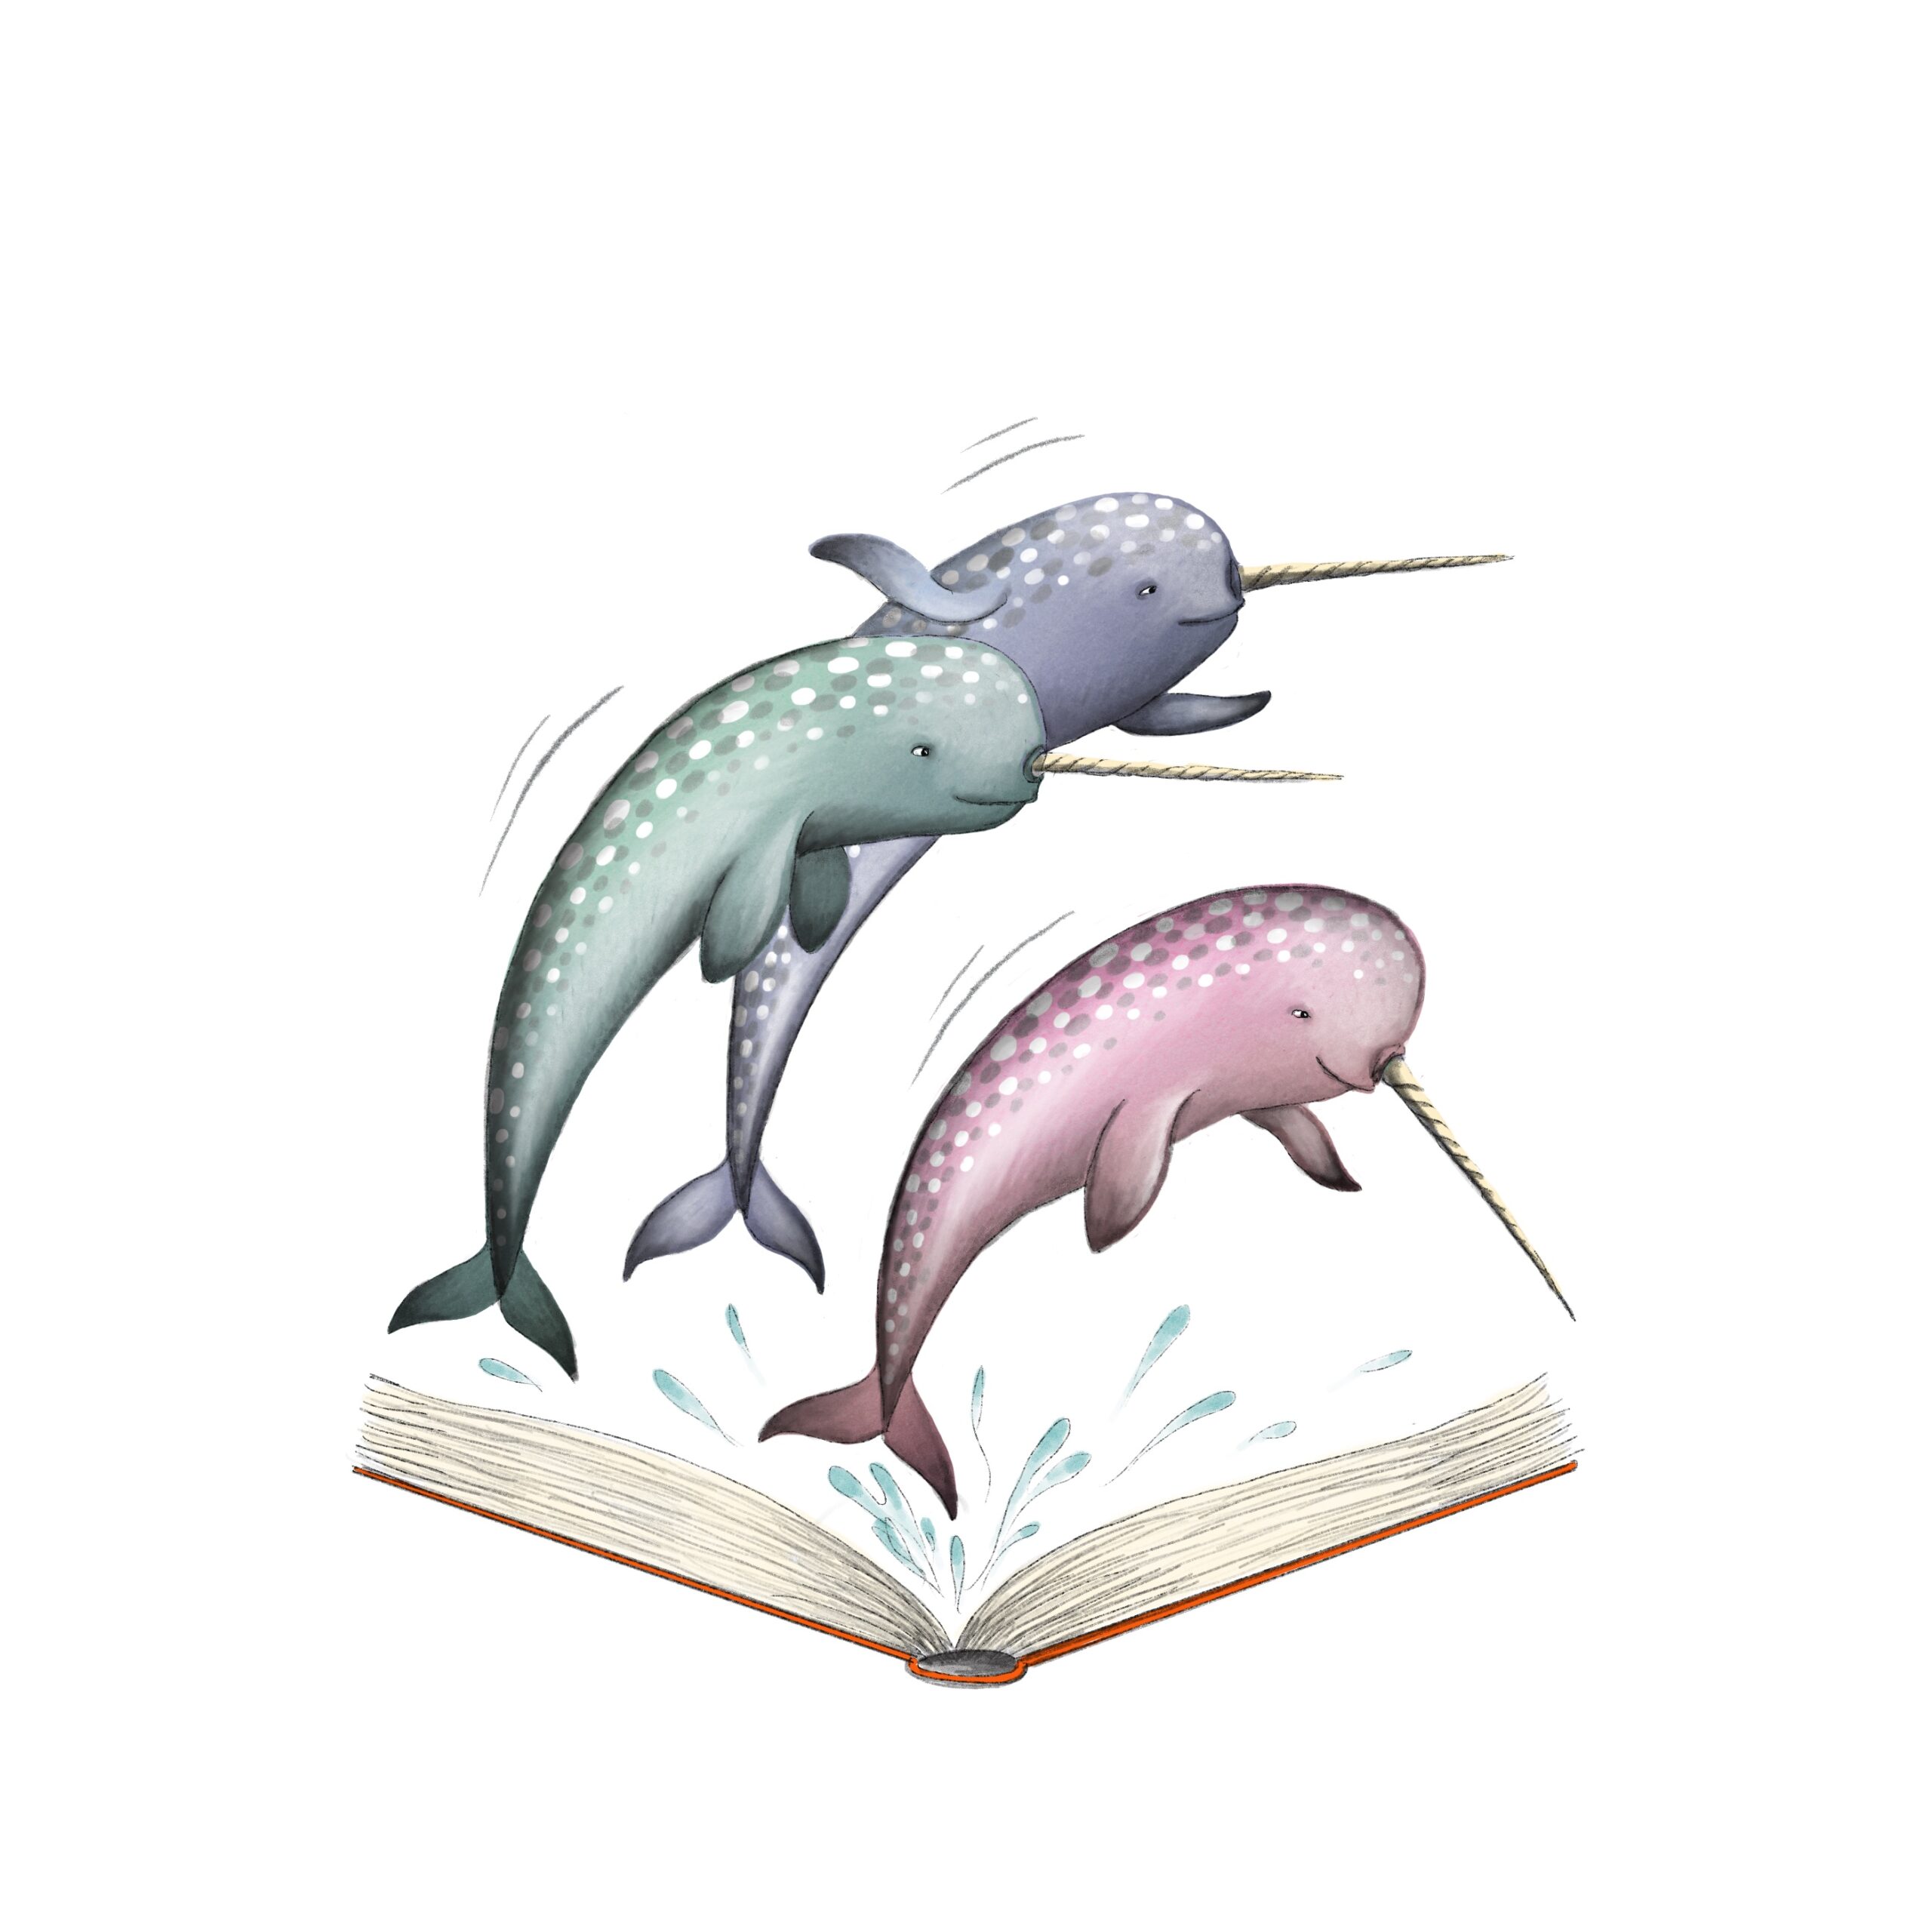 narwhals leaping out of a book